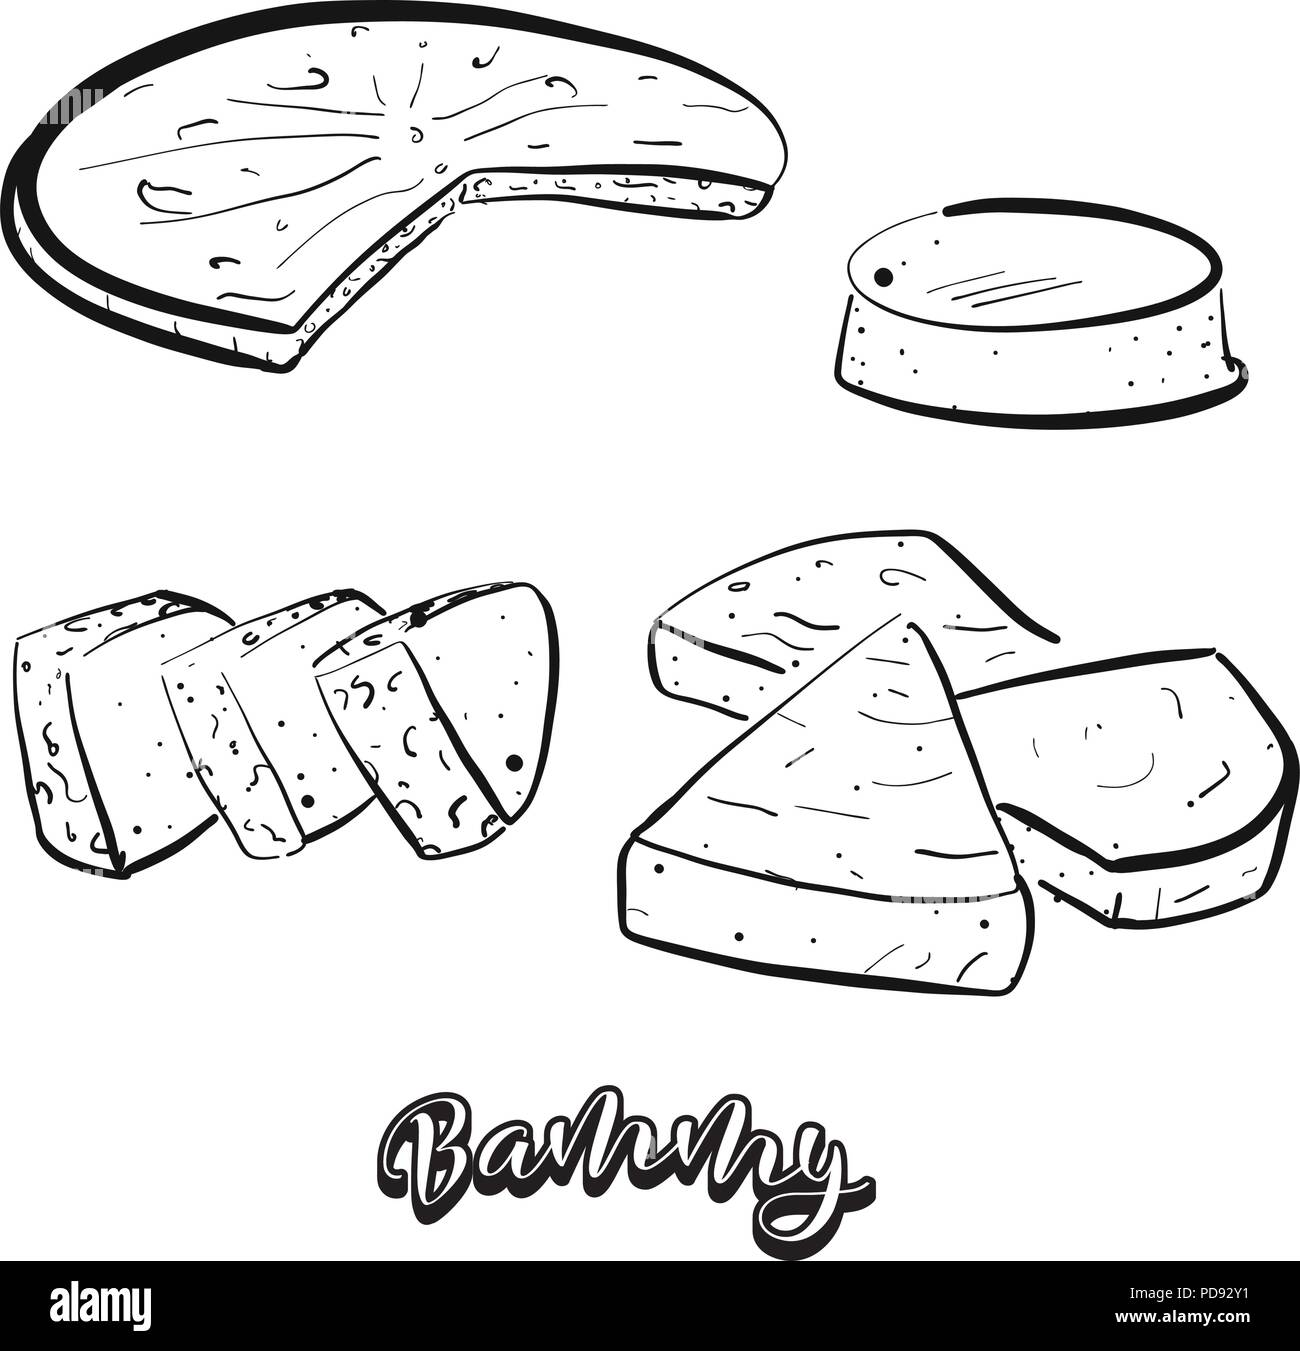 Hand drawn sketch of Bammy bread. Vector drawing of Flatbread food, usually known in Jamaica. Bread illustration series. Stock Vector